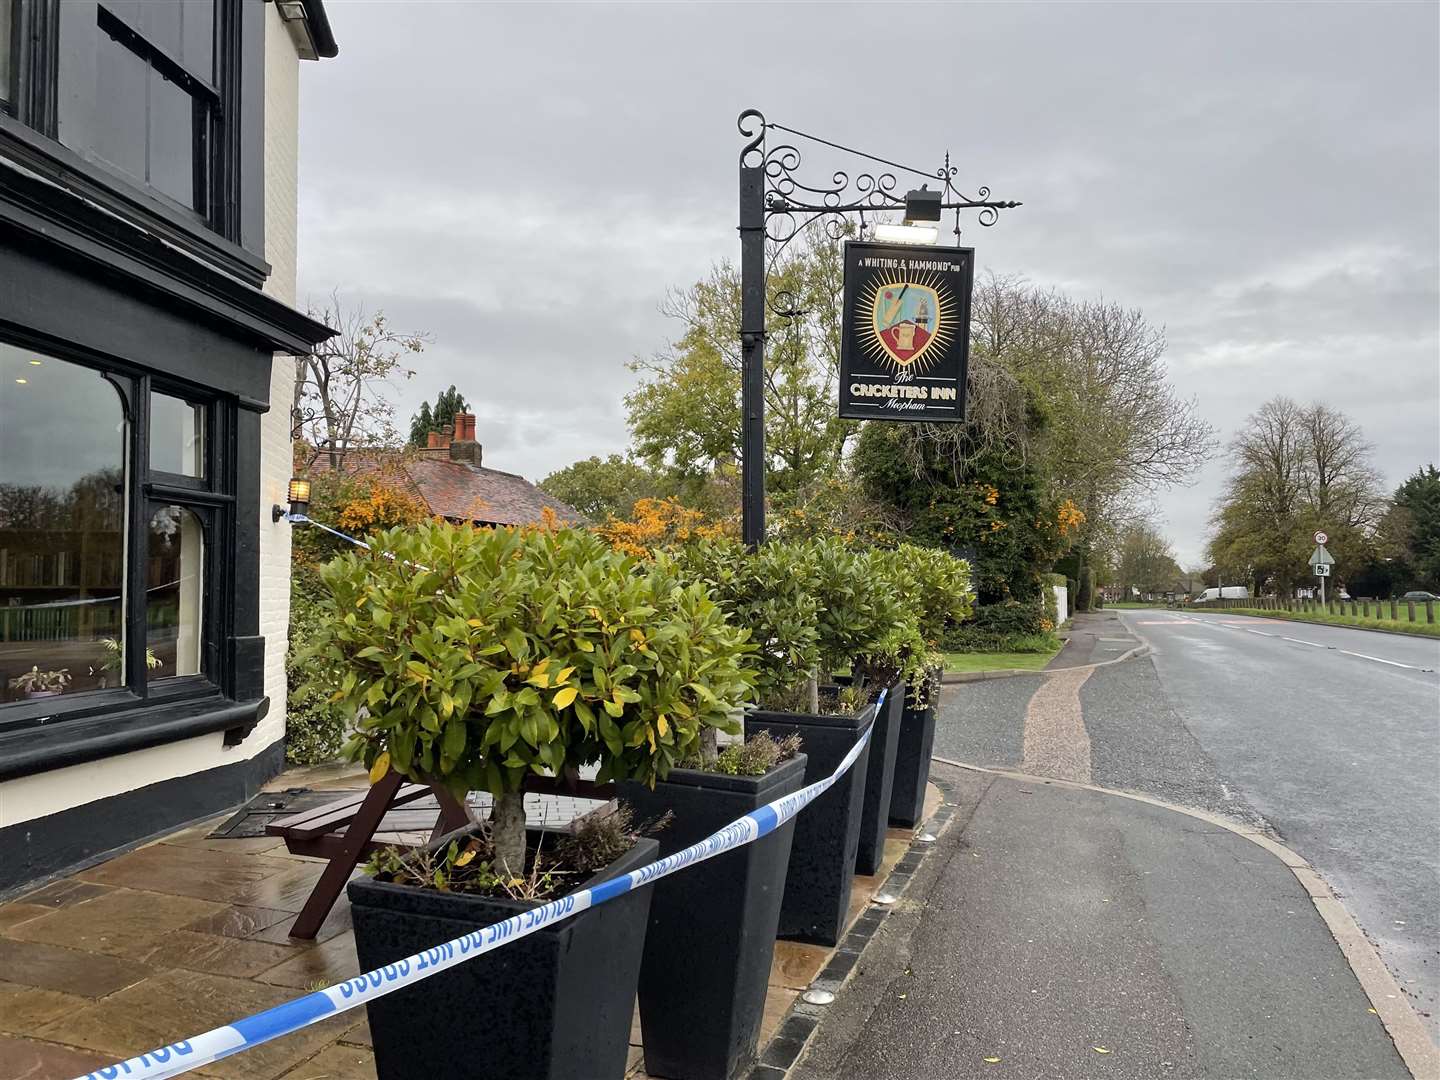 A stabbing took place at the Cricketers Inn in Meopham